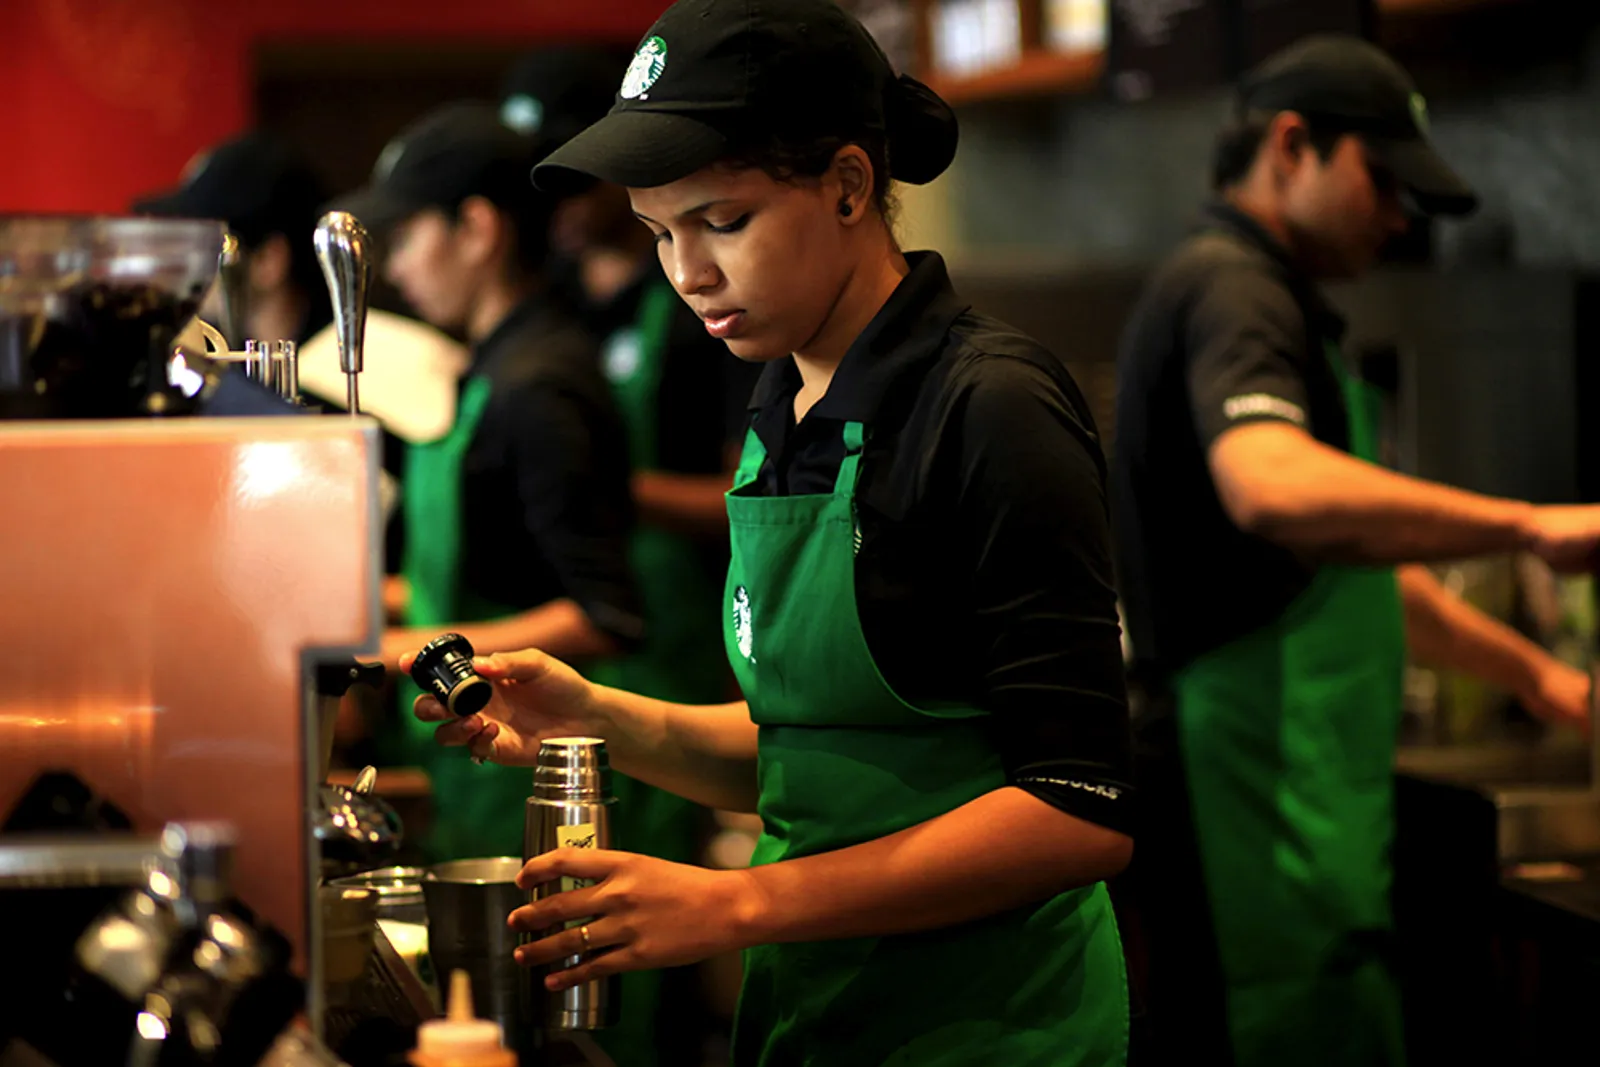 Tips for Starting a Career as a Barista